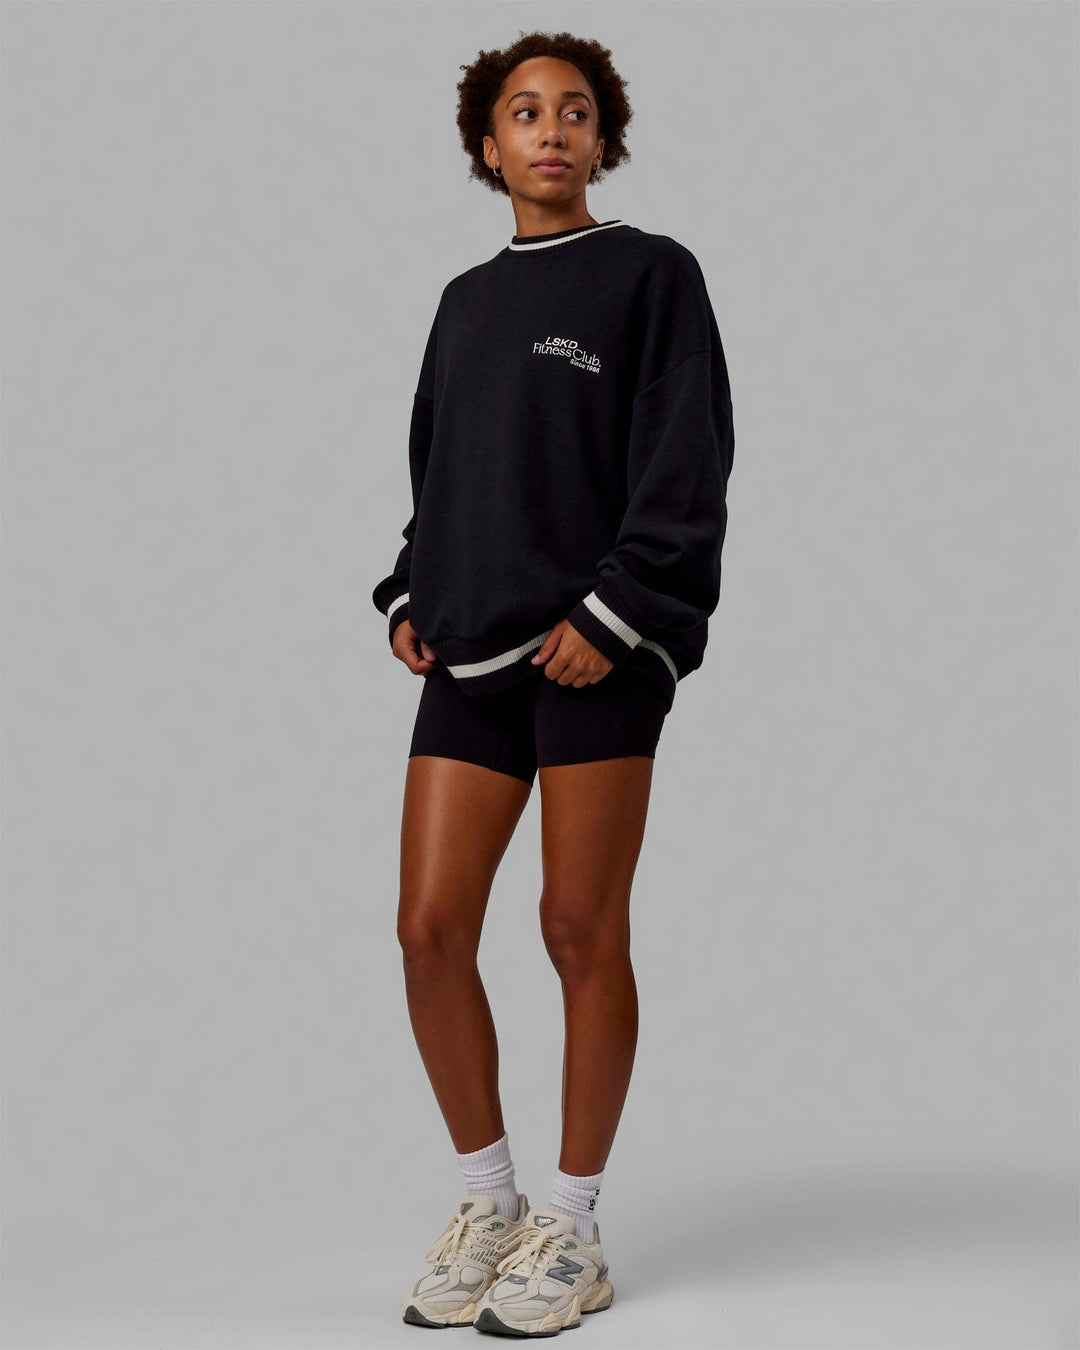 Woman wearing Unisex Fitness Club Sweater Oversize - Black-Off White